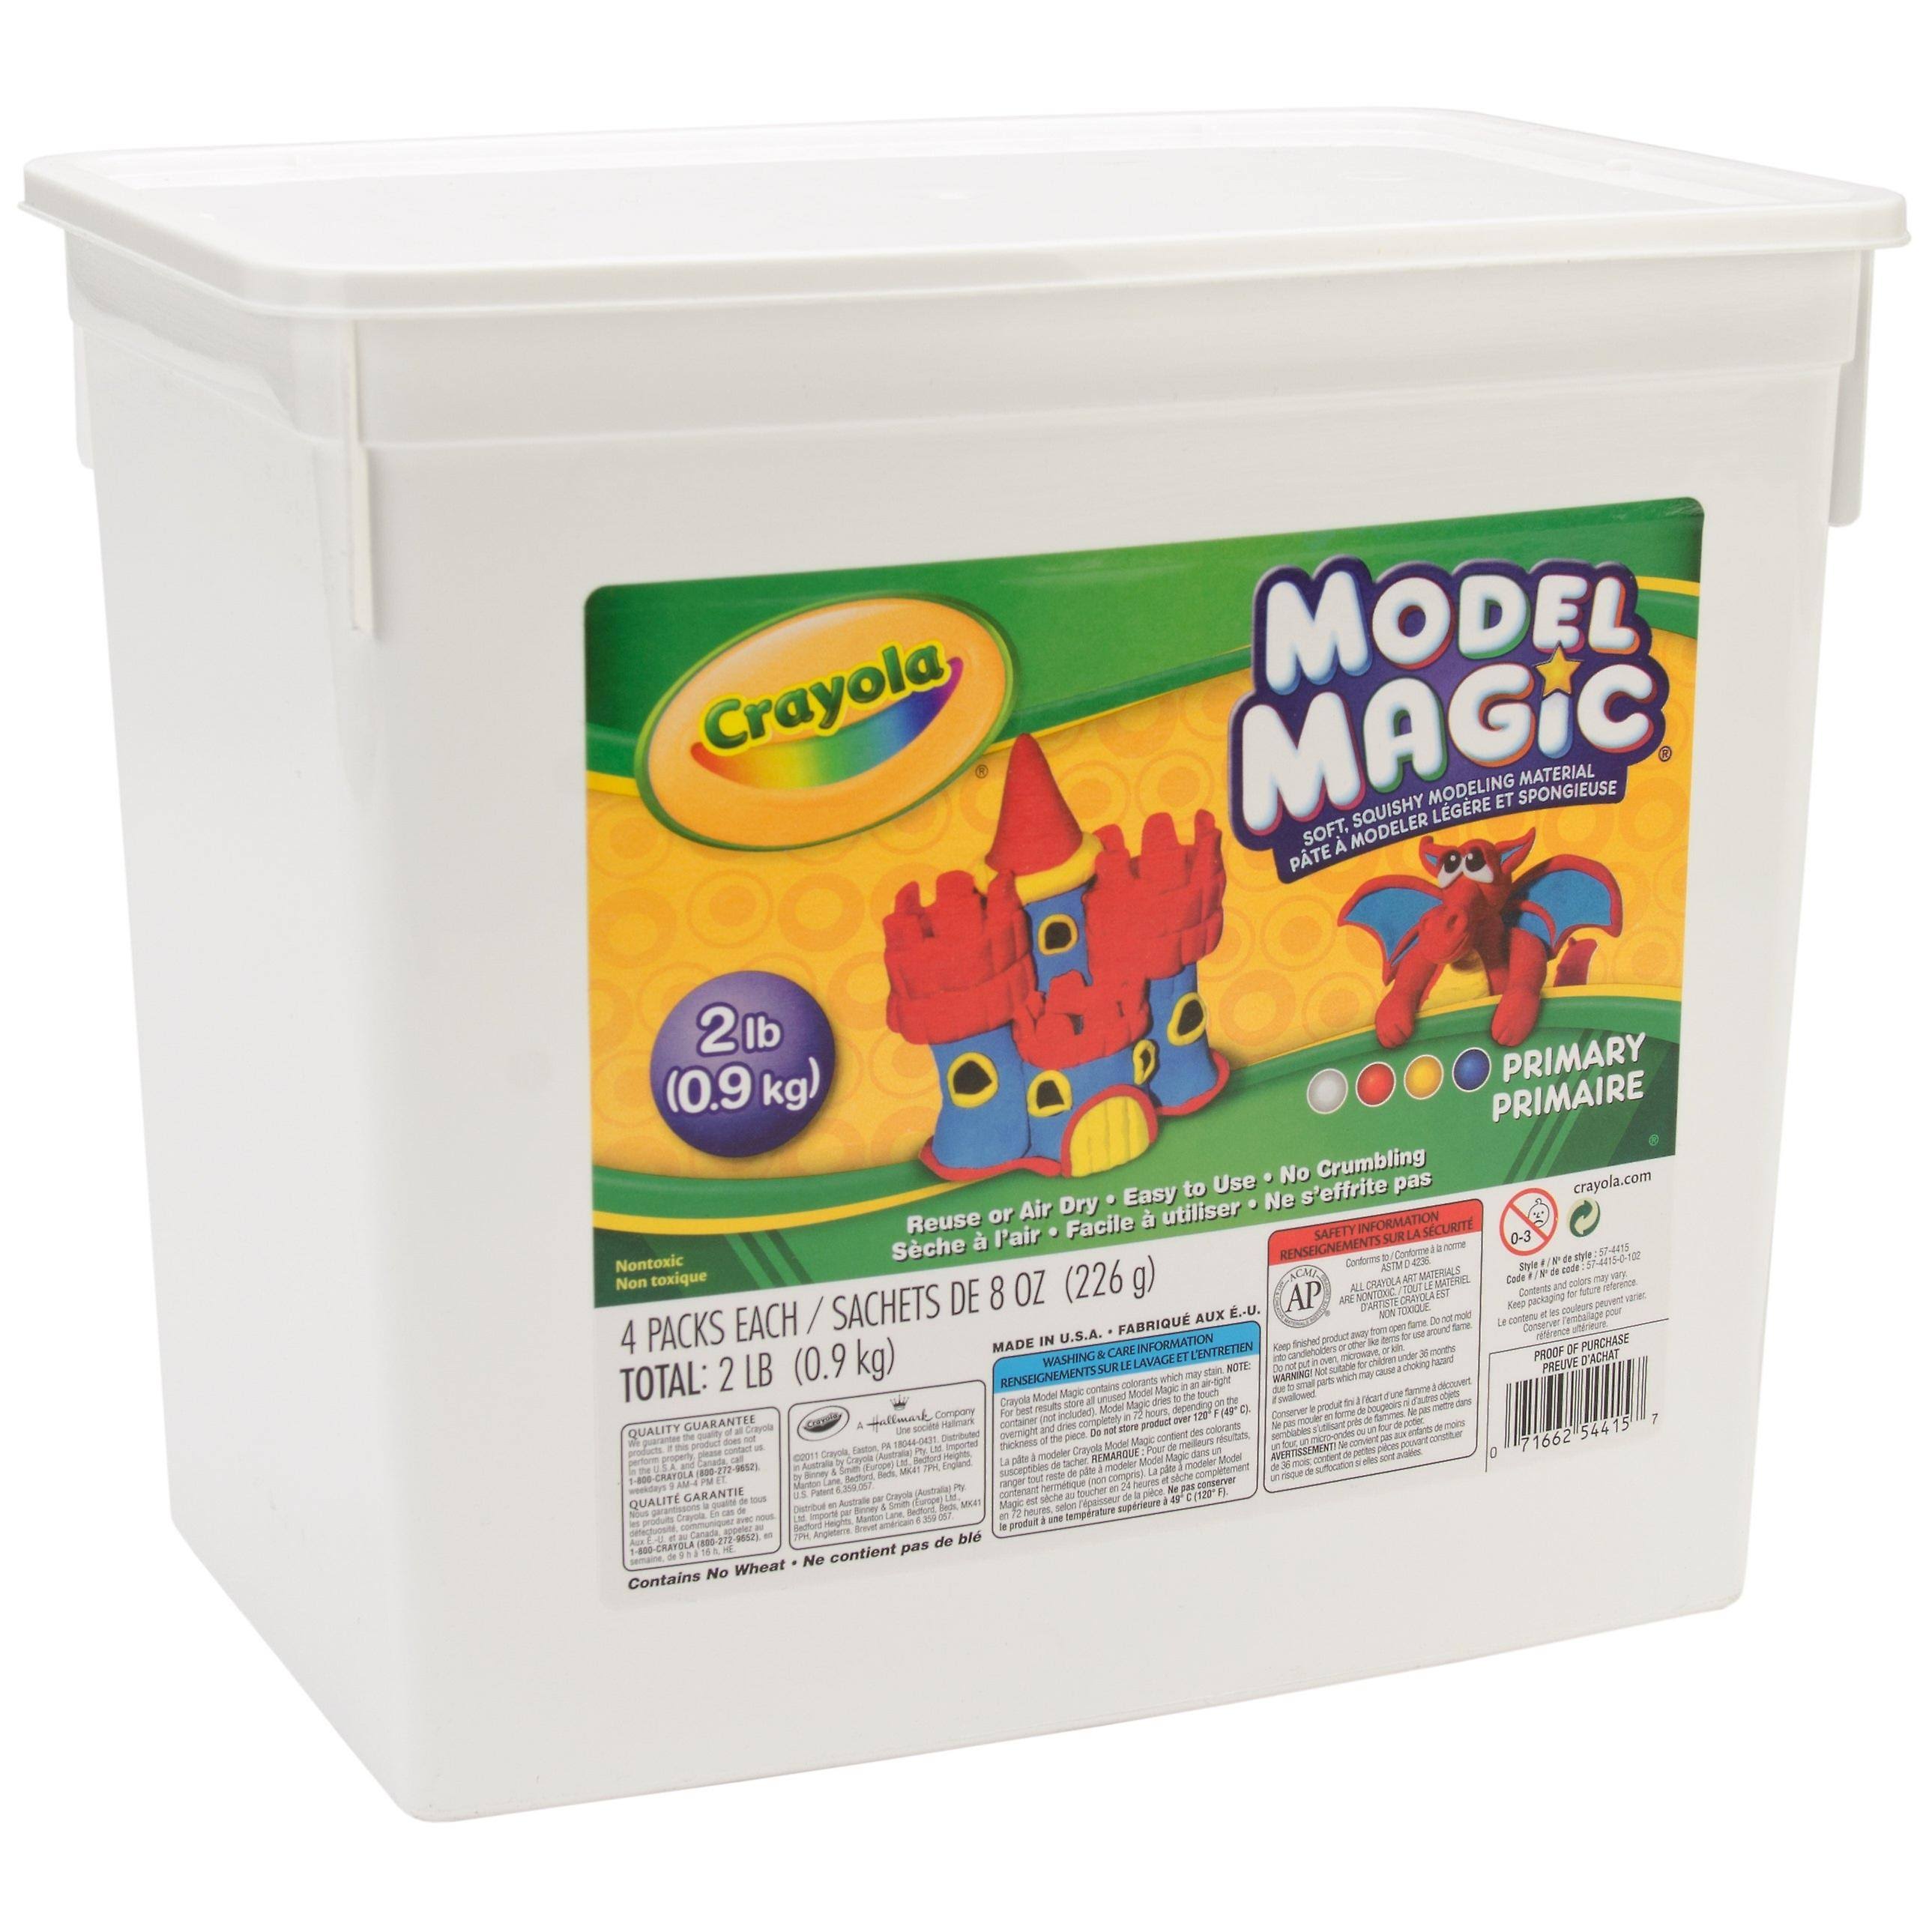 Crayola Model Magic Modeling Compound Clay - Blue/Red/White/Yellow, 2lbs